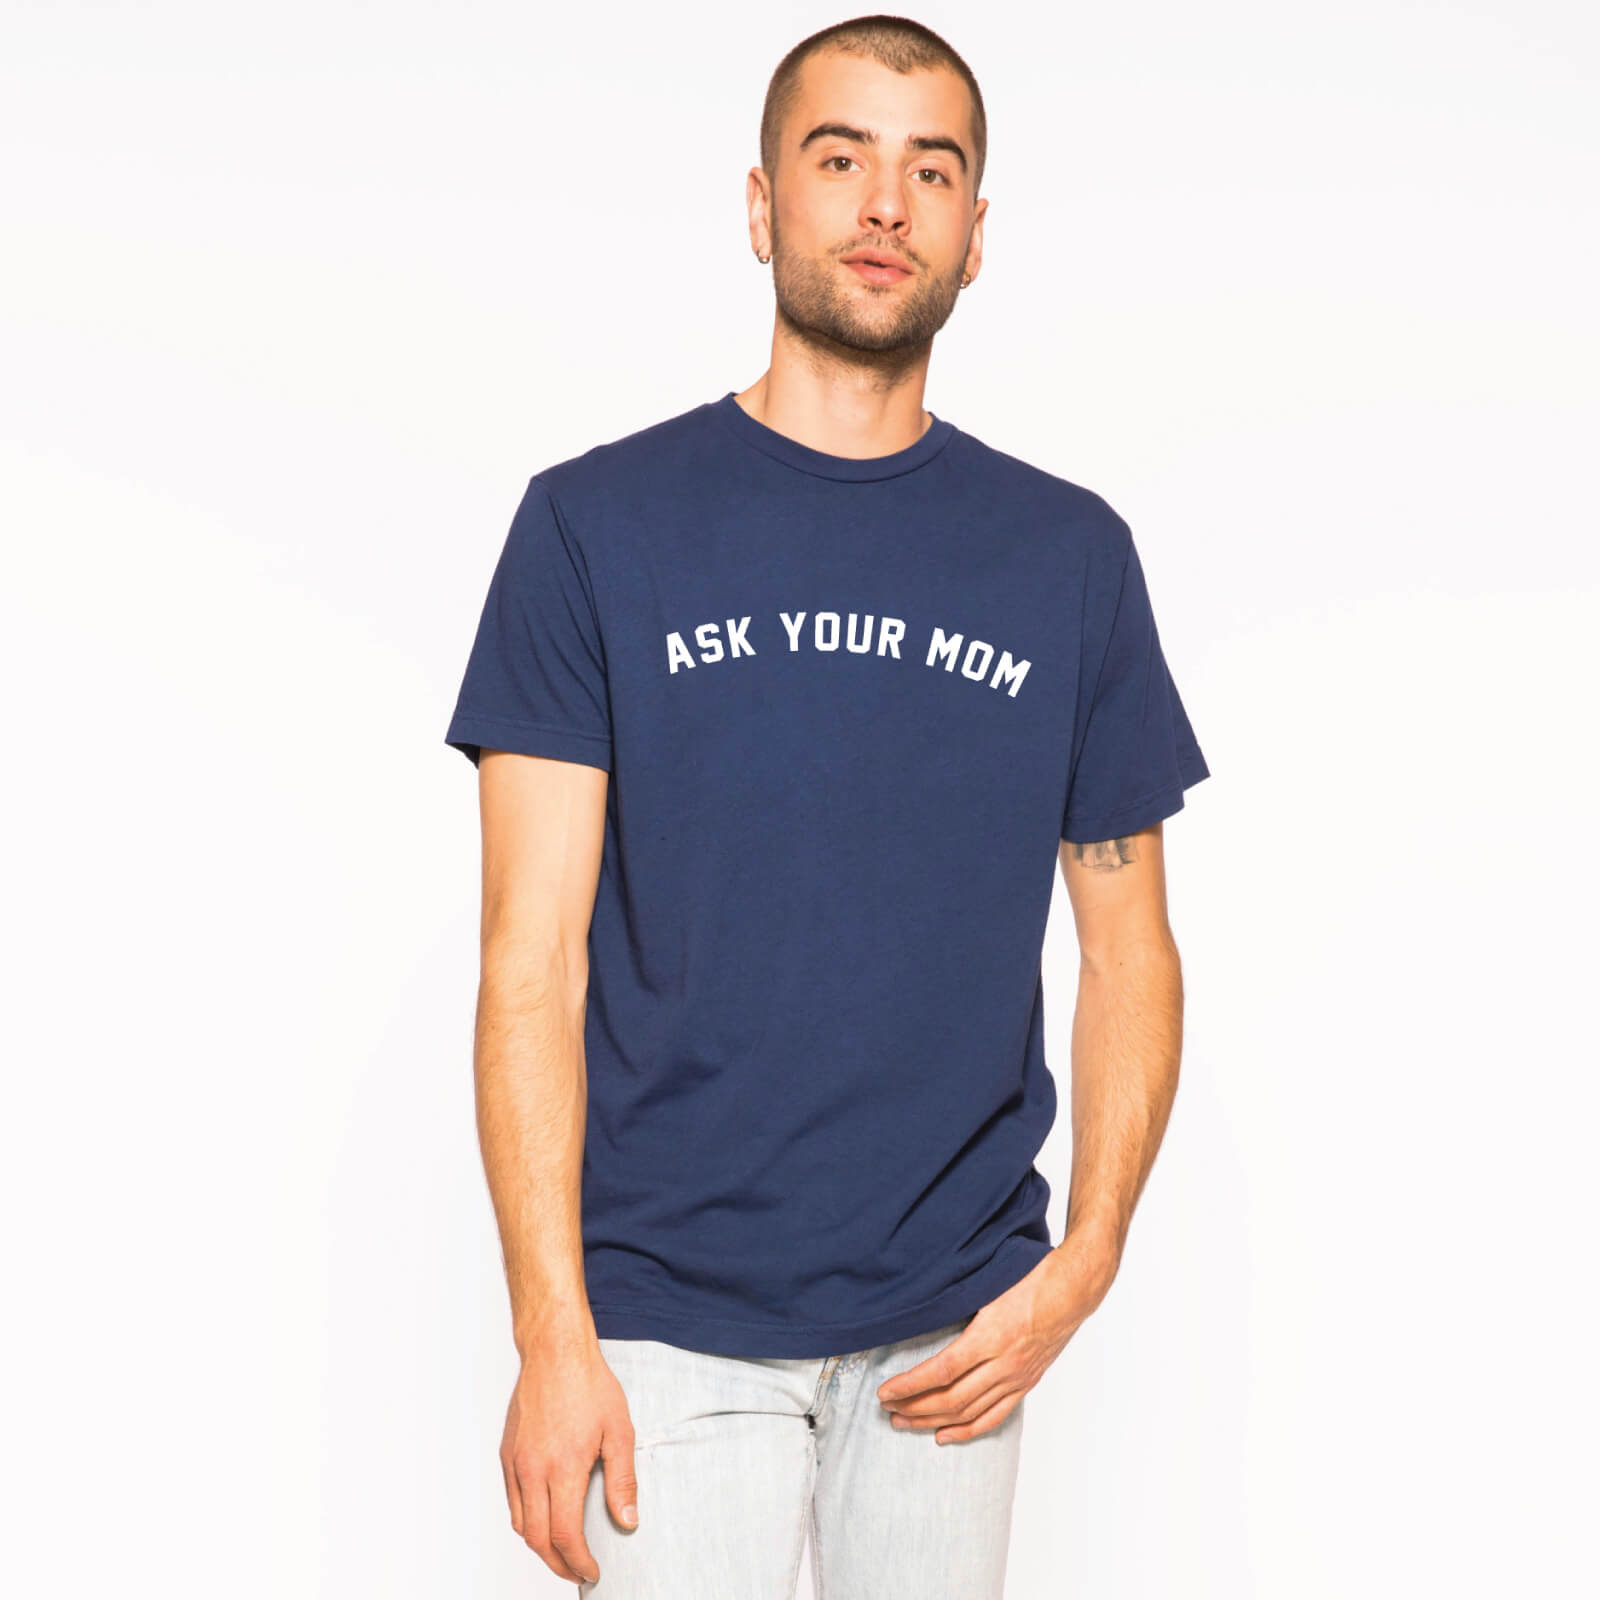 Sub_Urban Riot’s Ask Your Mom Tee: Under $50